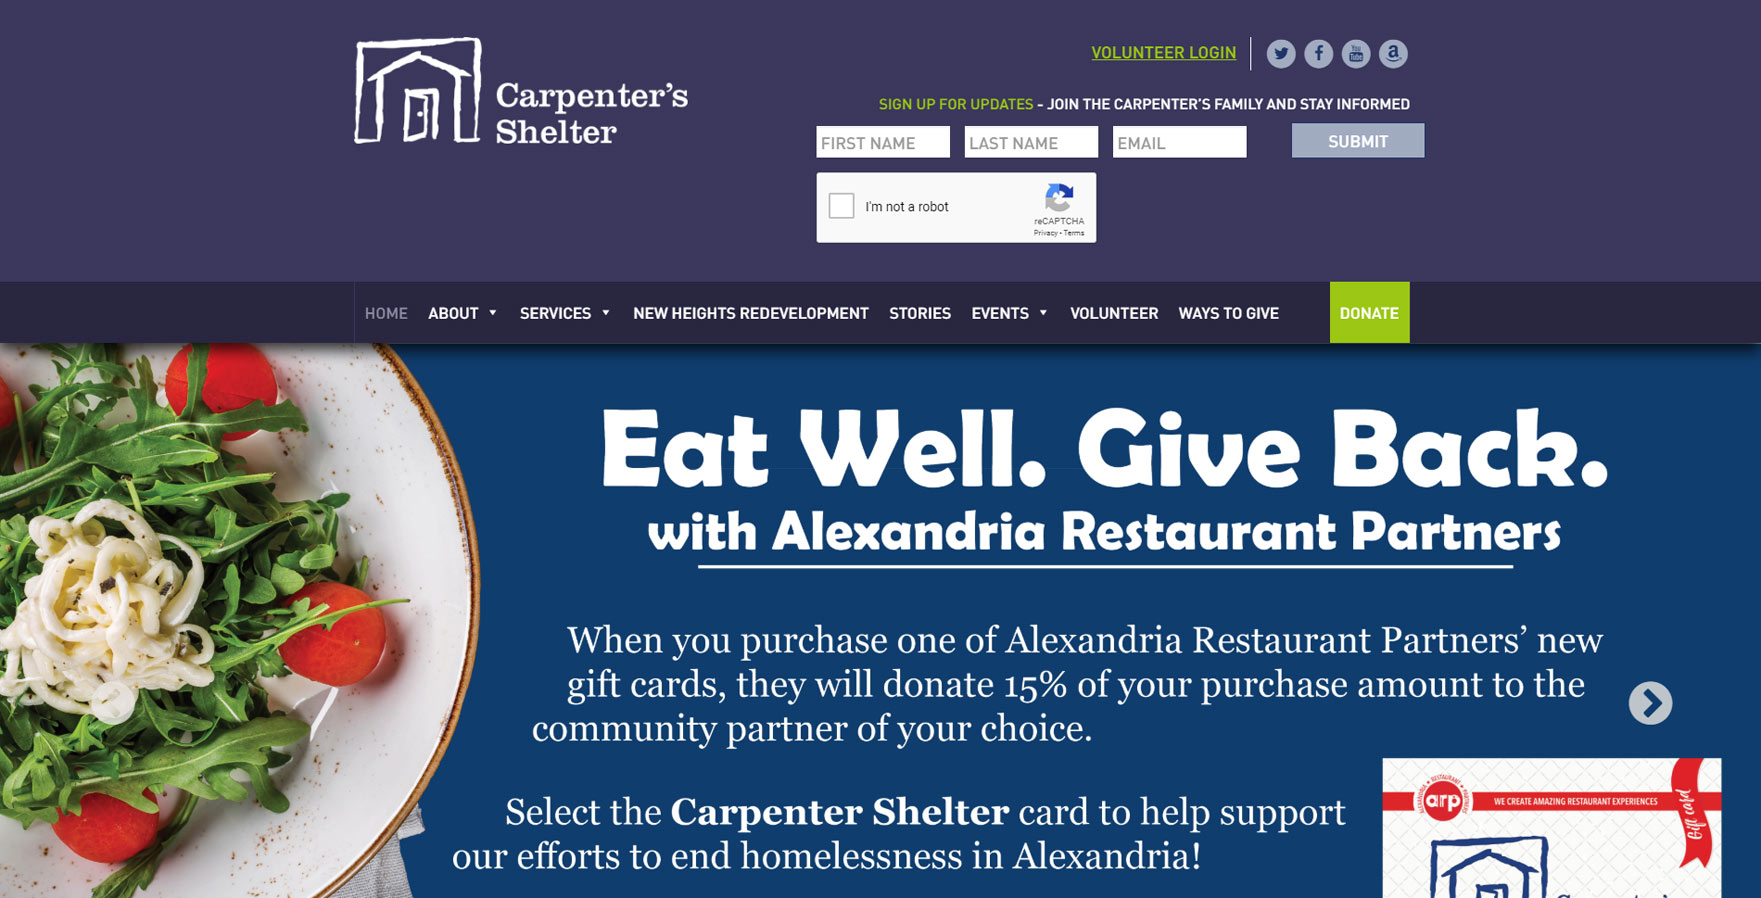 A WordPress website developed by Advanced Systemics for Carpenter's Shelter in Alexandria, Virginia